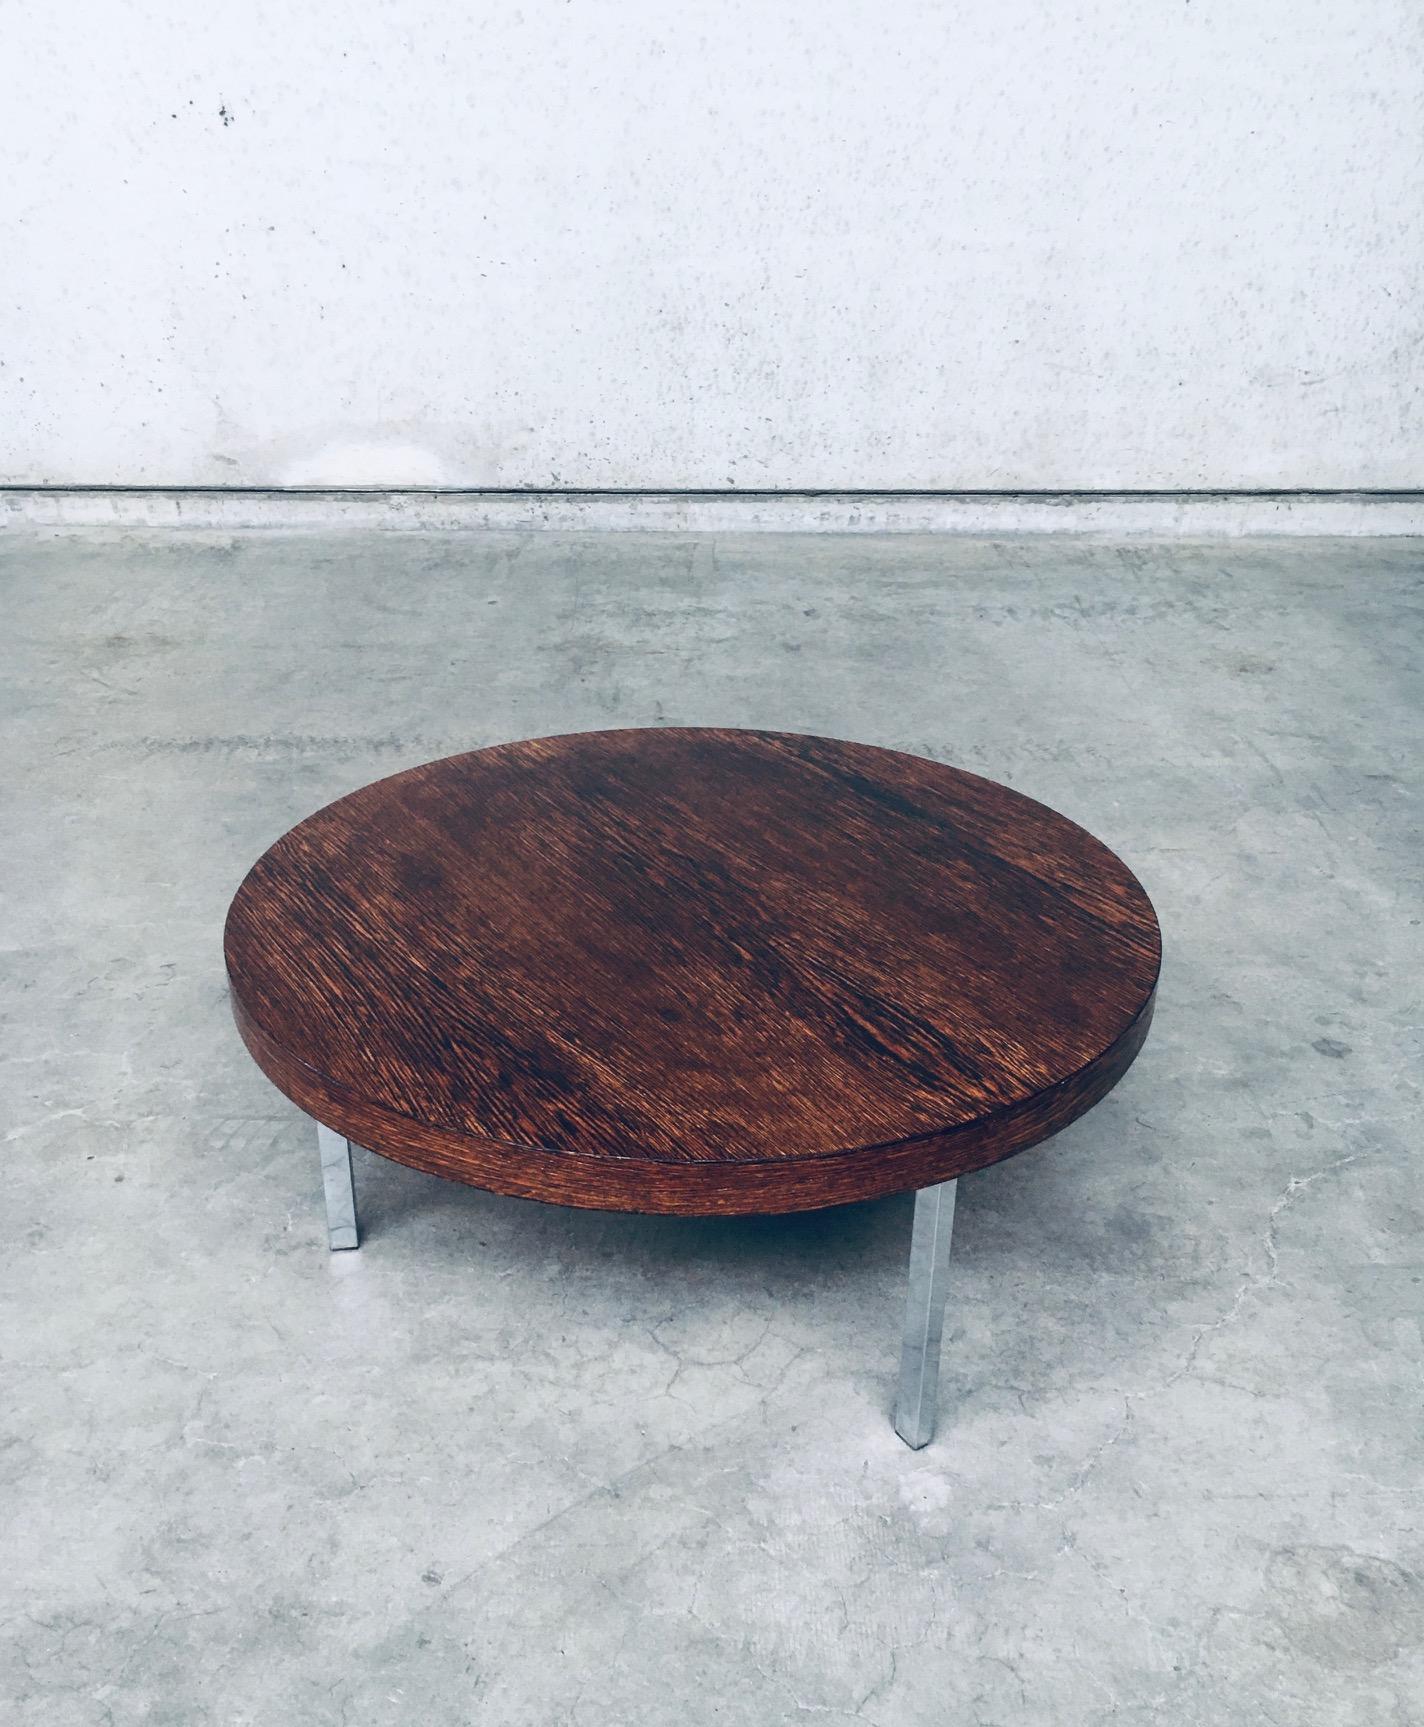 Midcentury Modern Dutch Design Tripod Coffee Table, Netherlands 1960's In Good Condition For Sale In Oud-Turnhout, VAN